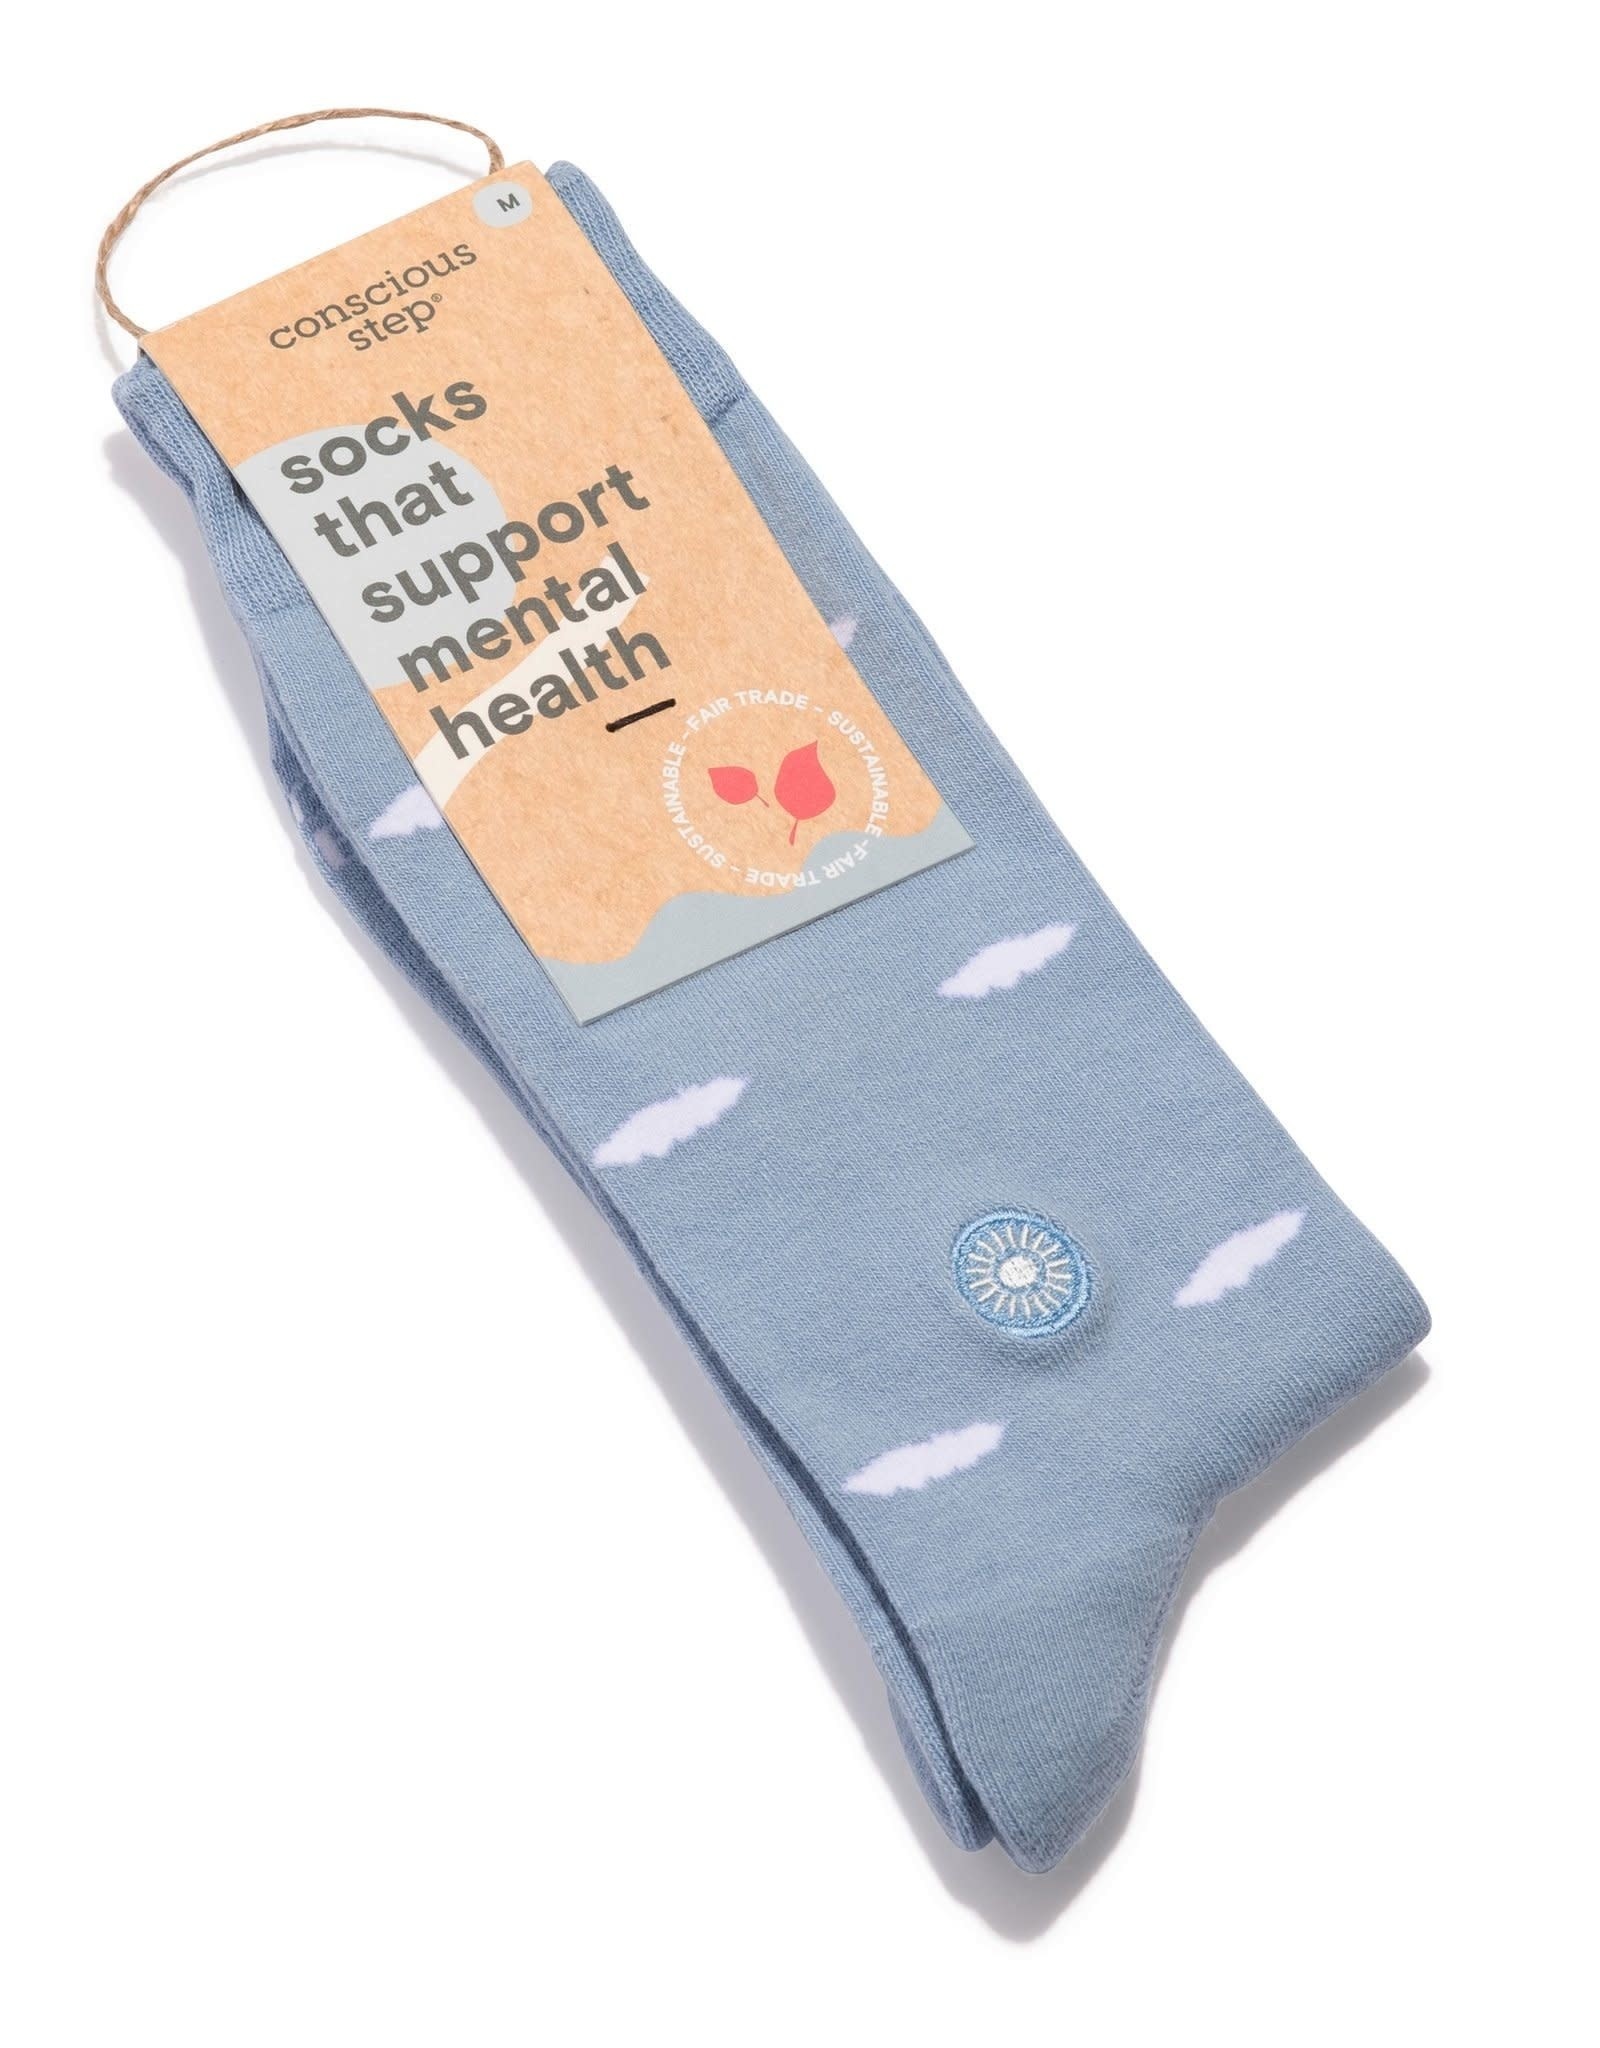 Conscious Step Socks that Support Mental Health (Clouds)